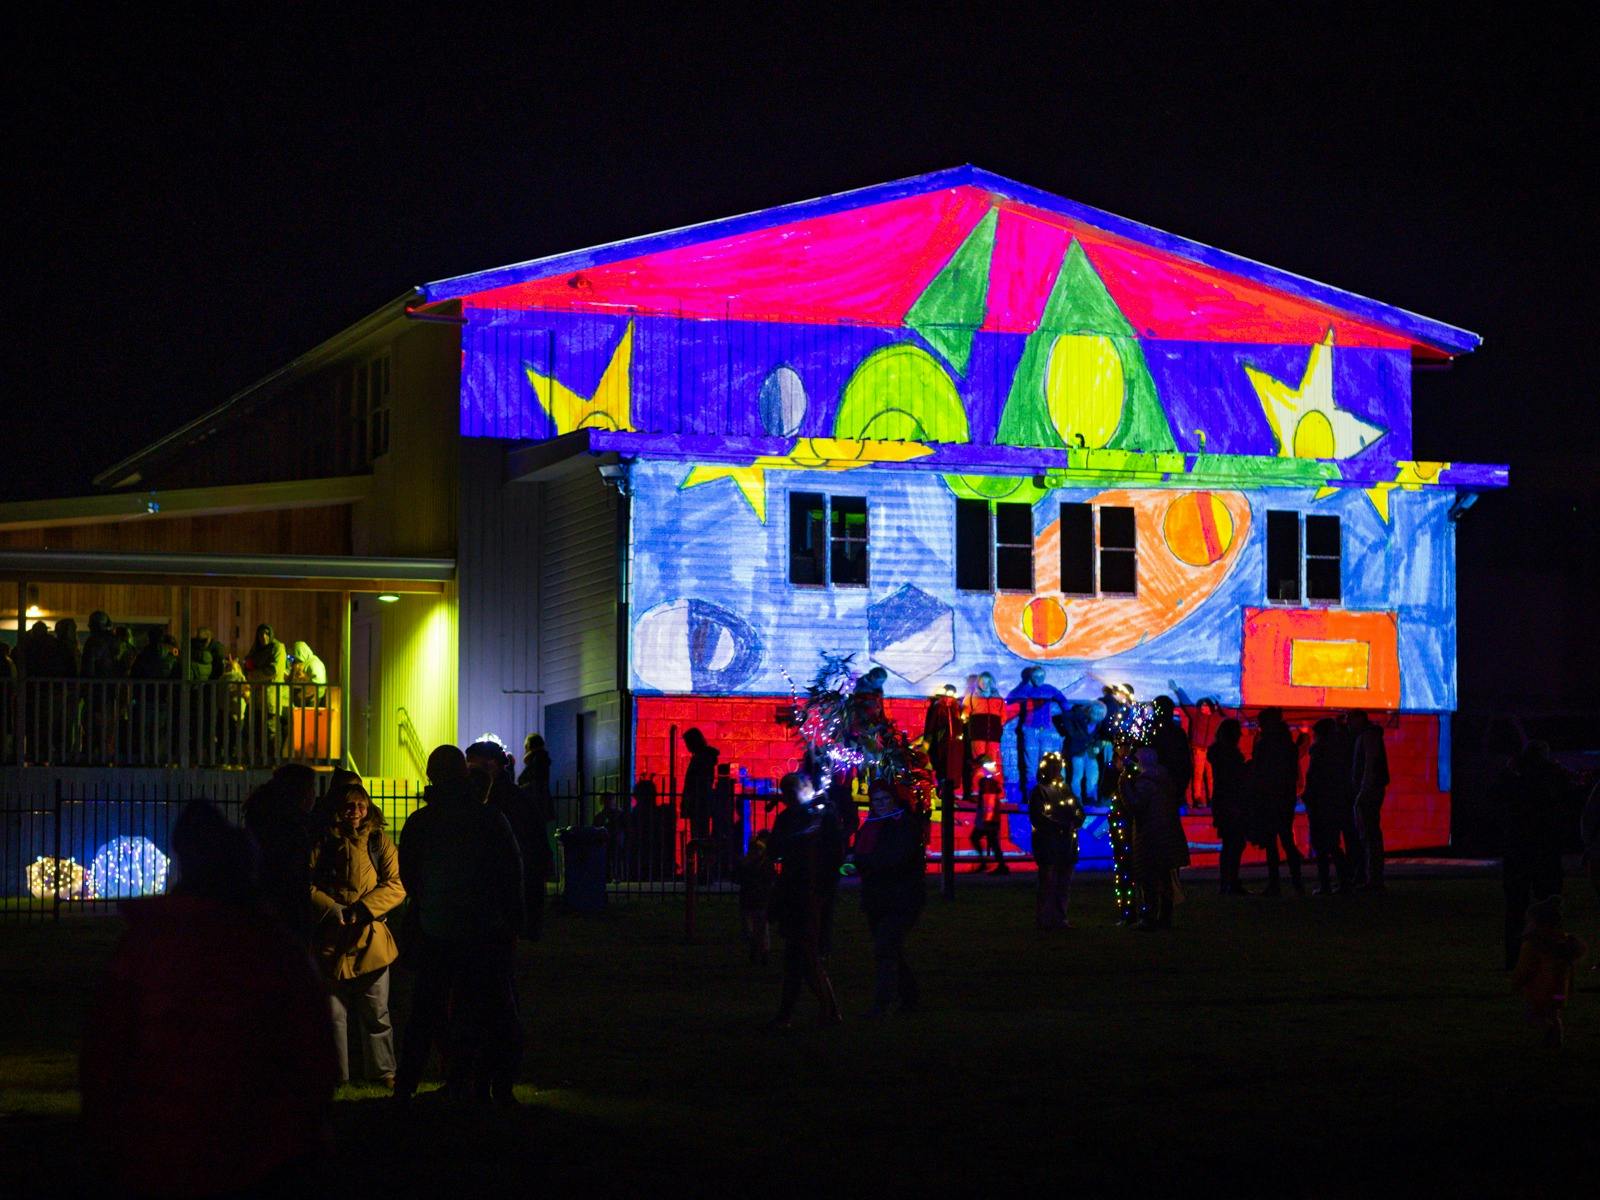 A colourful children's artwork is projected on the outside of a building.